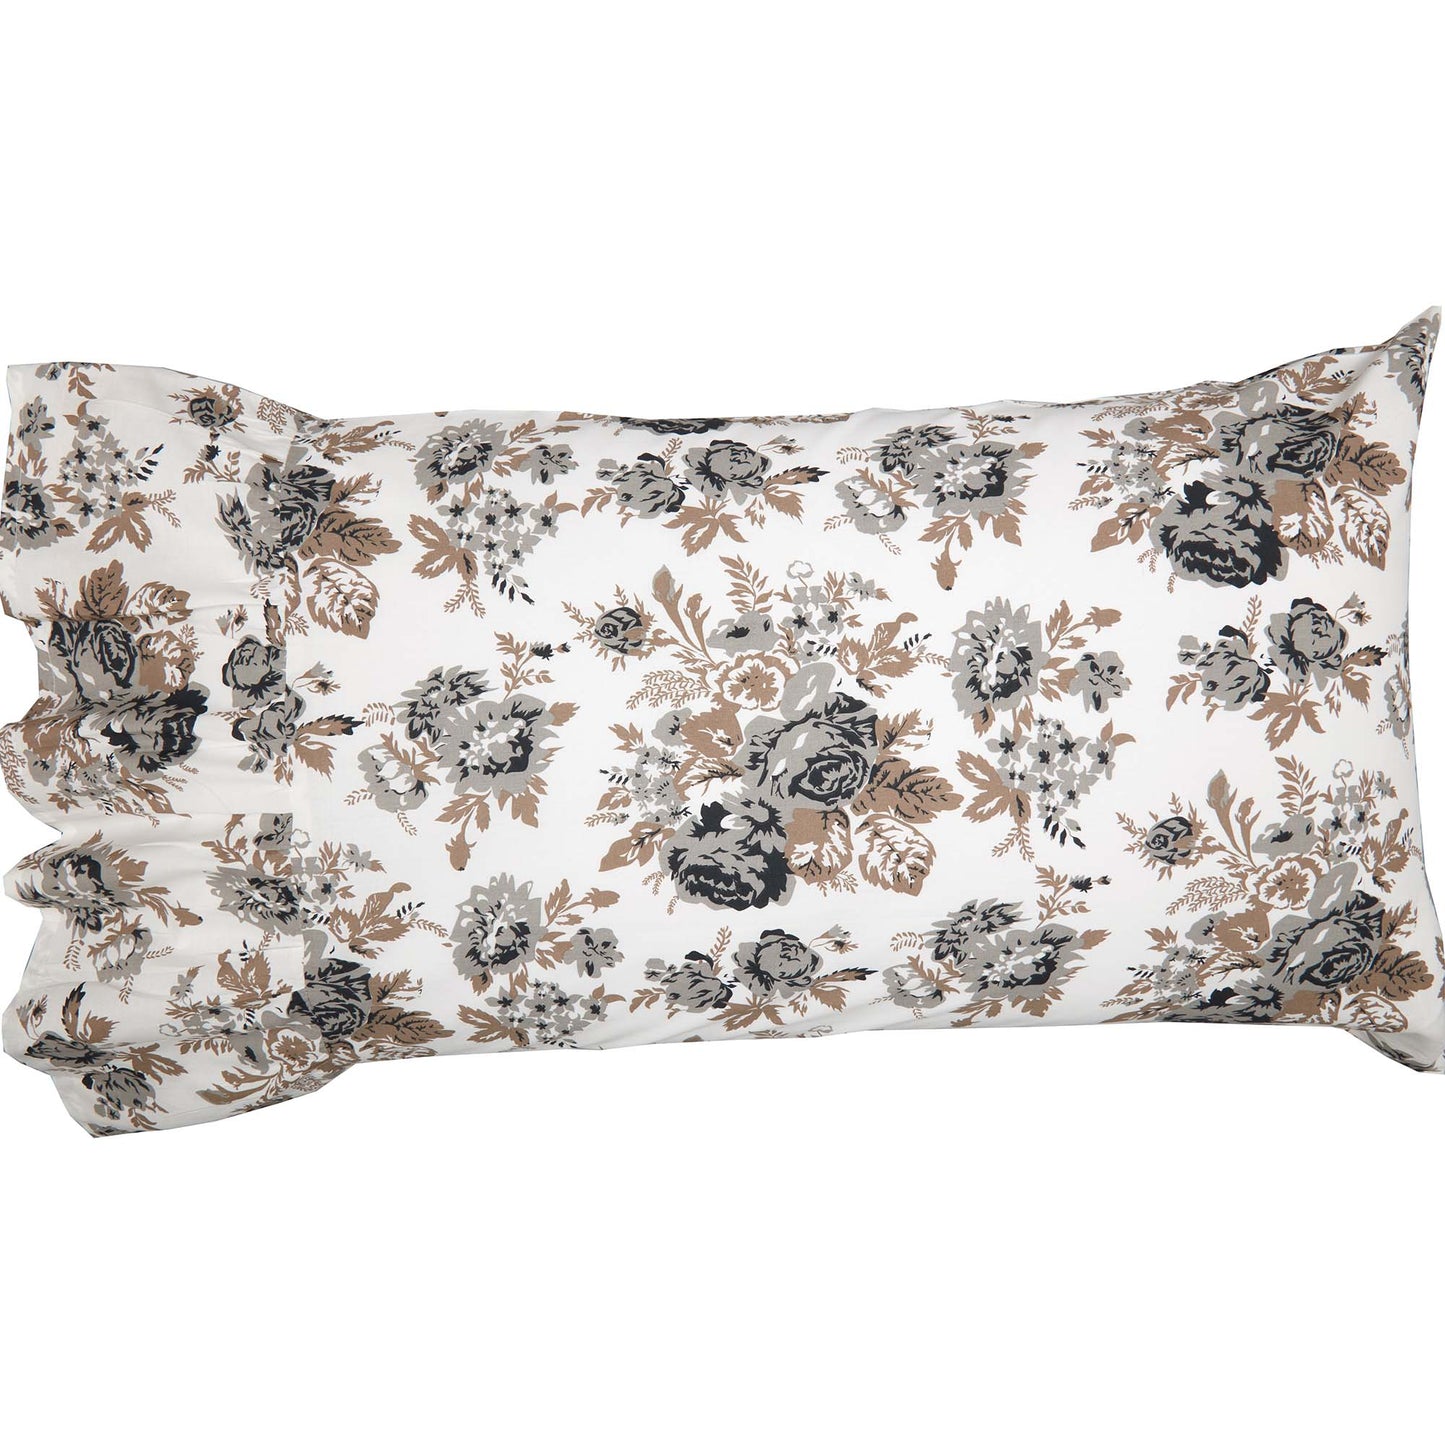 70018-Annie-Portabella-Floral-Ruffled-Standard-Pillow-Case-Set-of-2-21x26-8-image-1